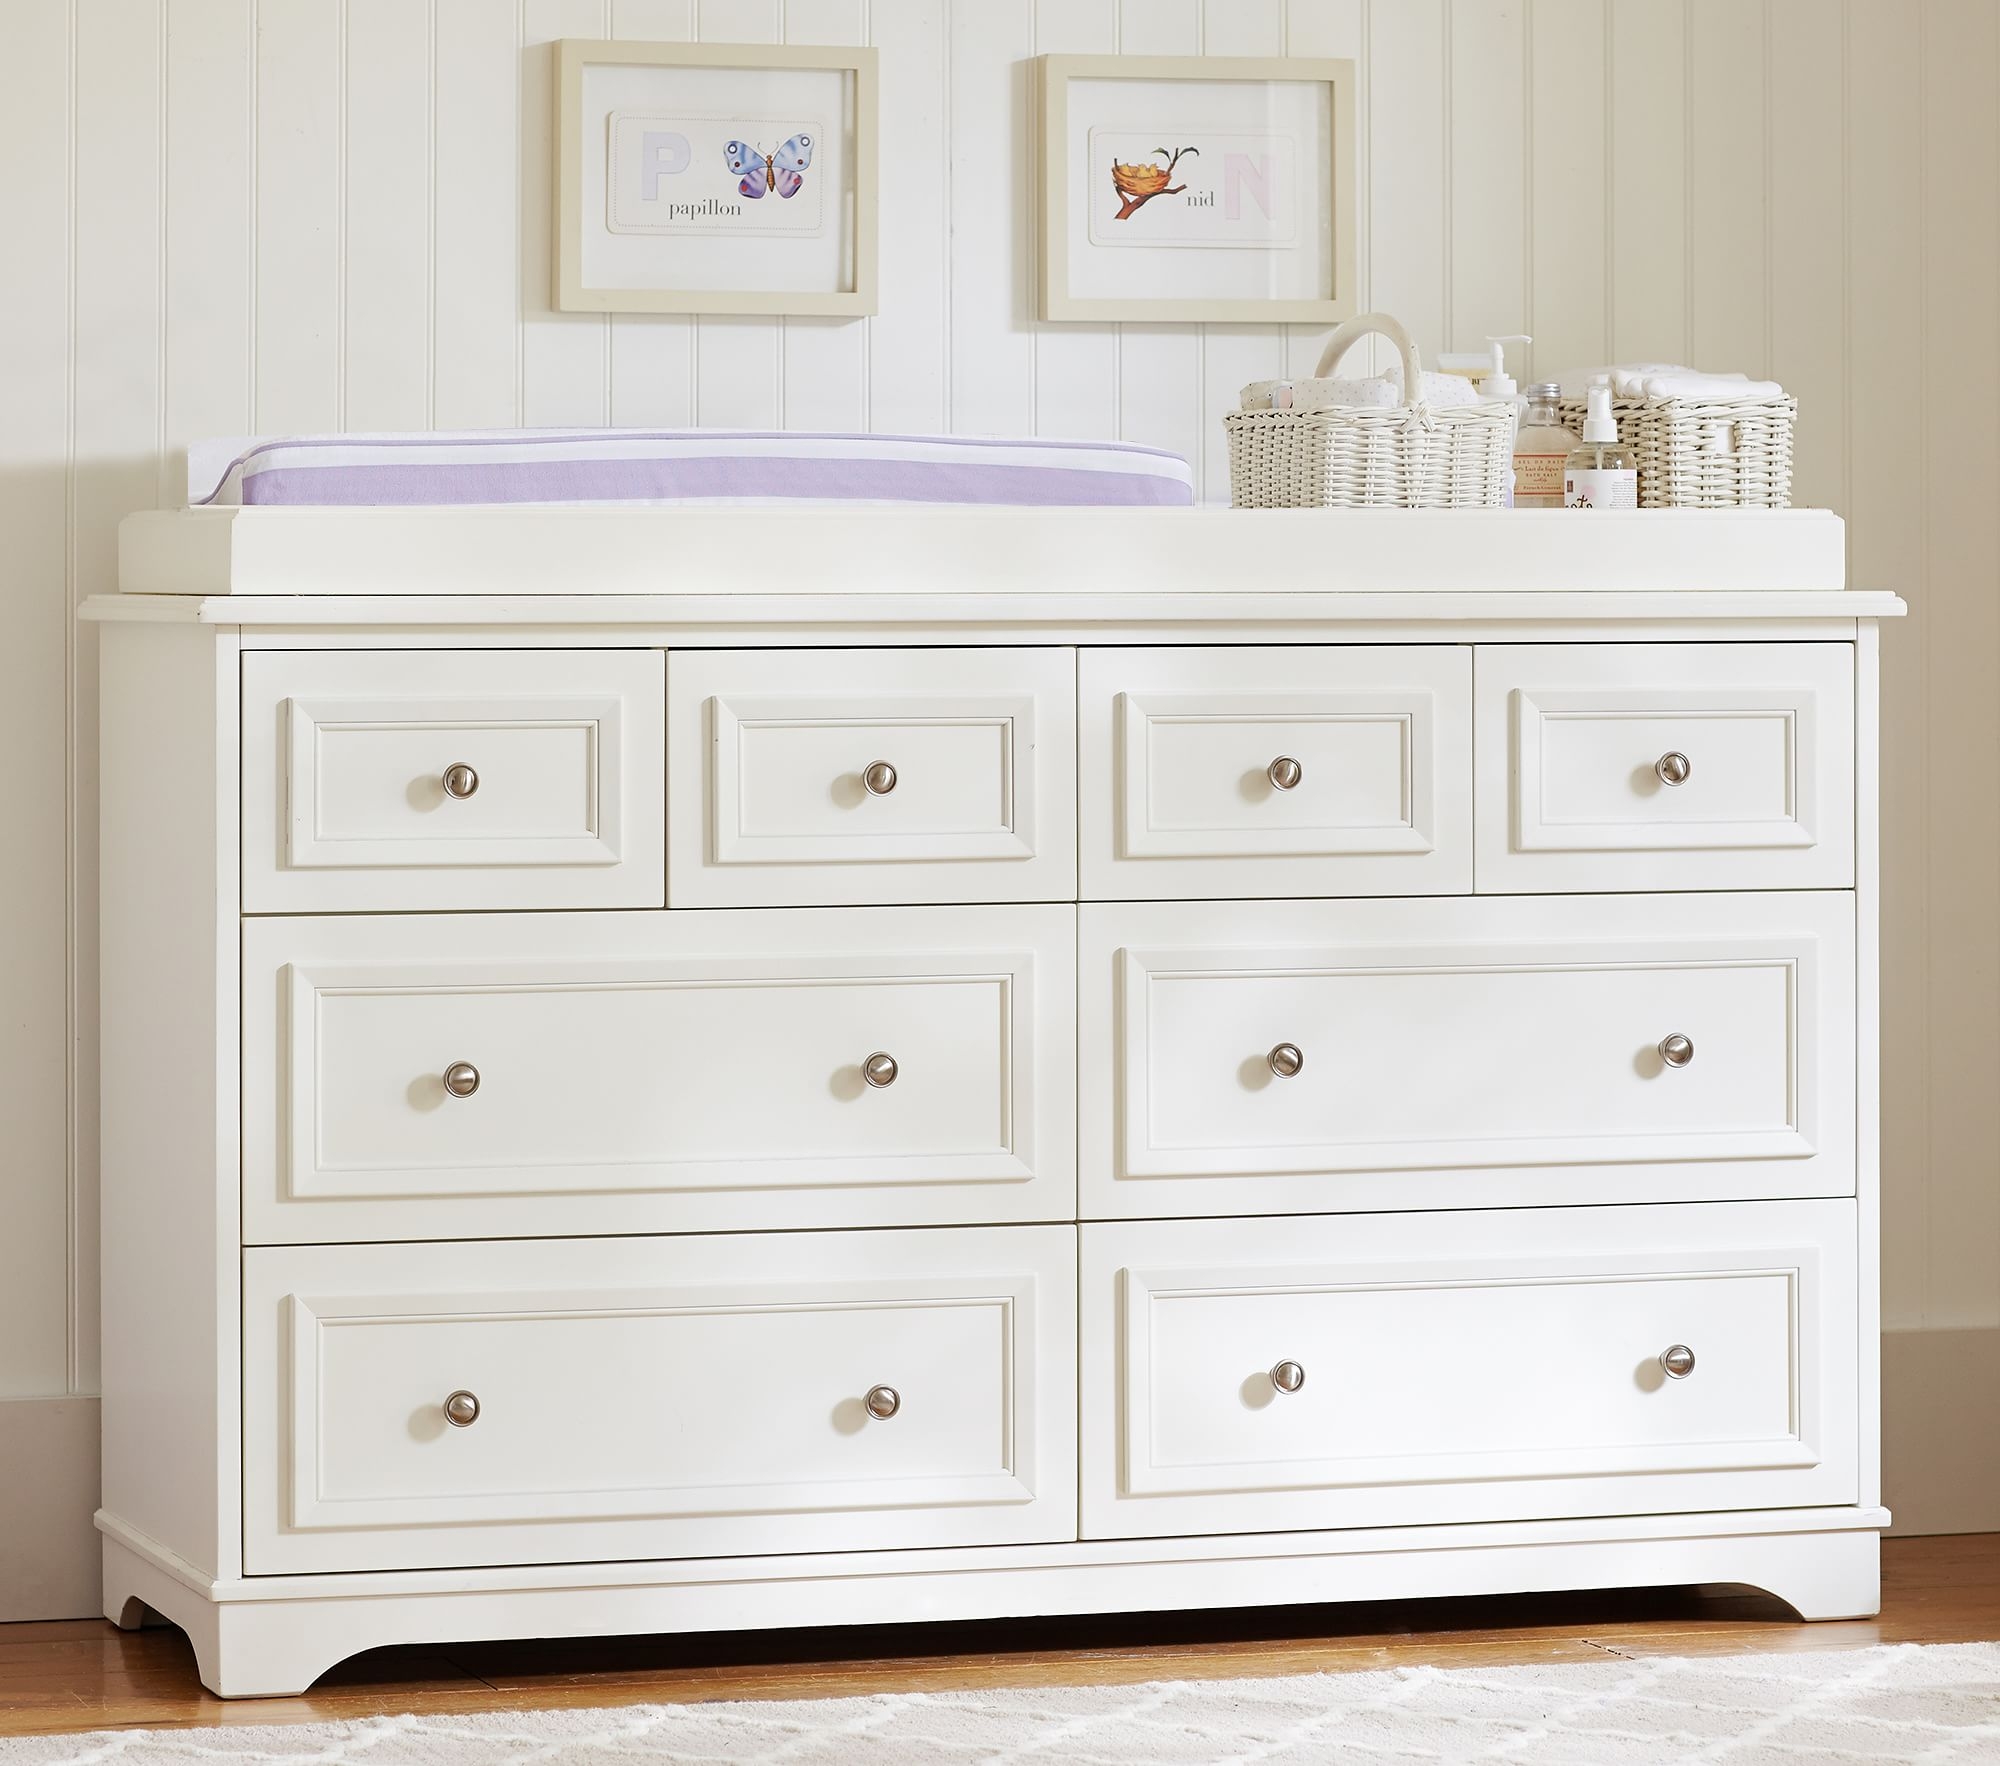 Fillmore Extra-Wide Dresser & Changing Table Topper, Simply White, In-Home Delivery - Image 1